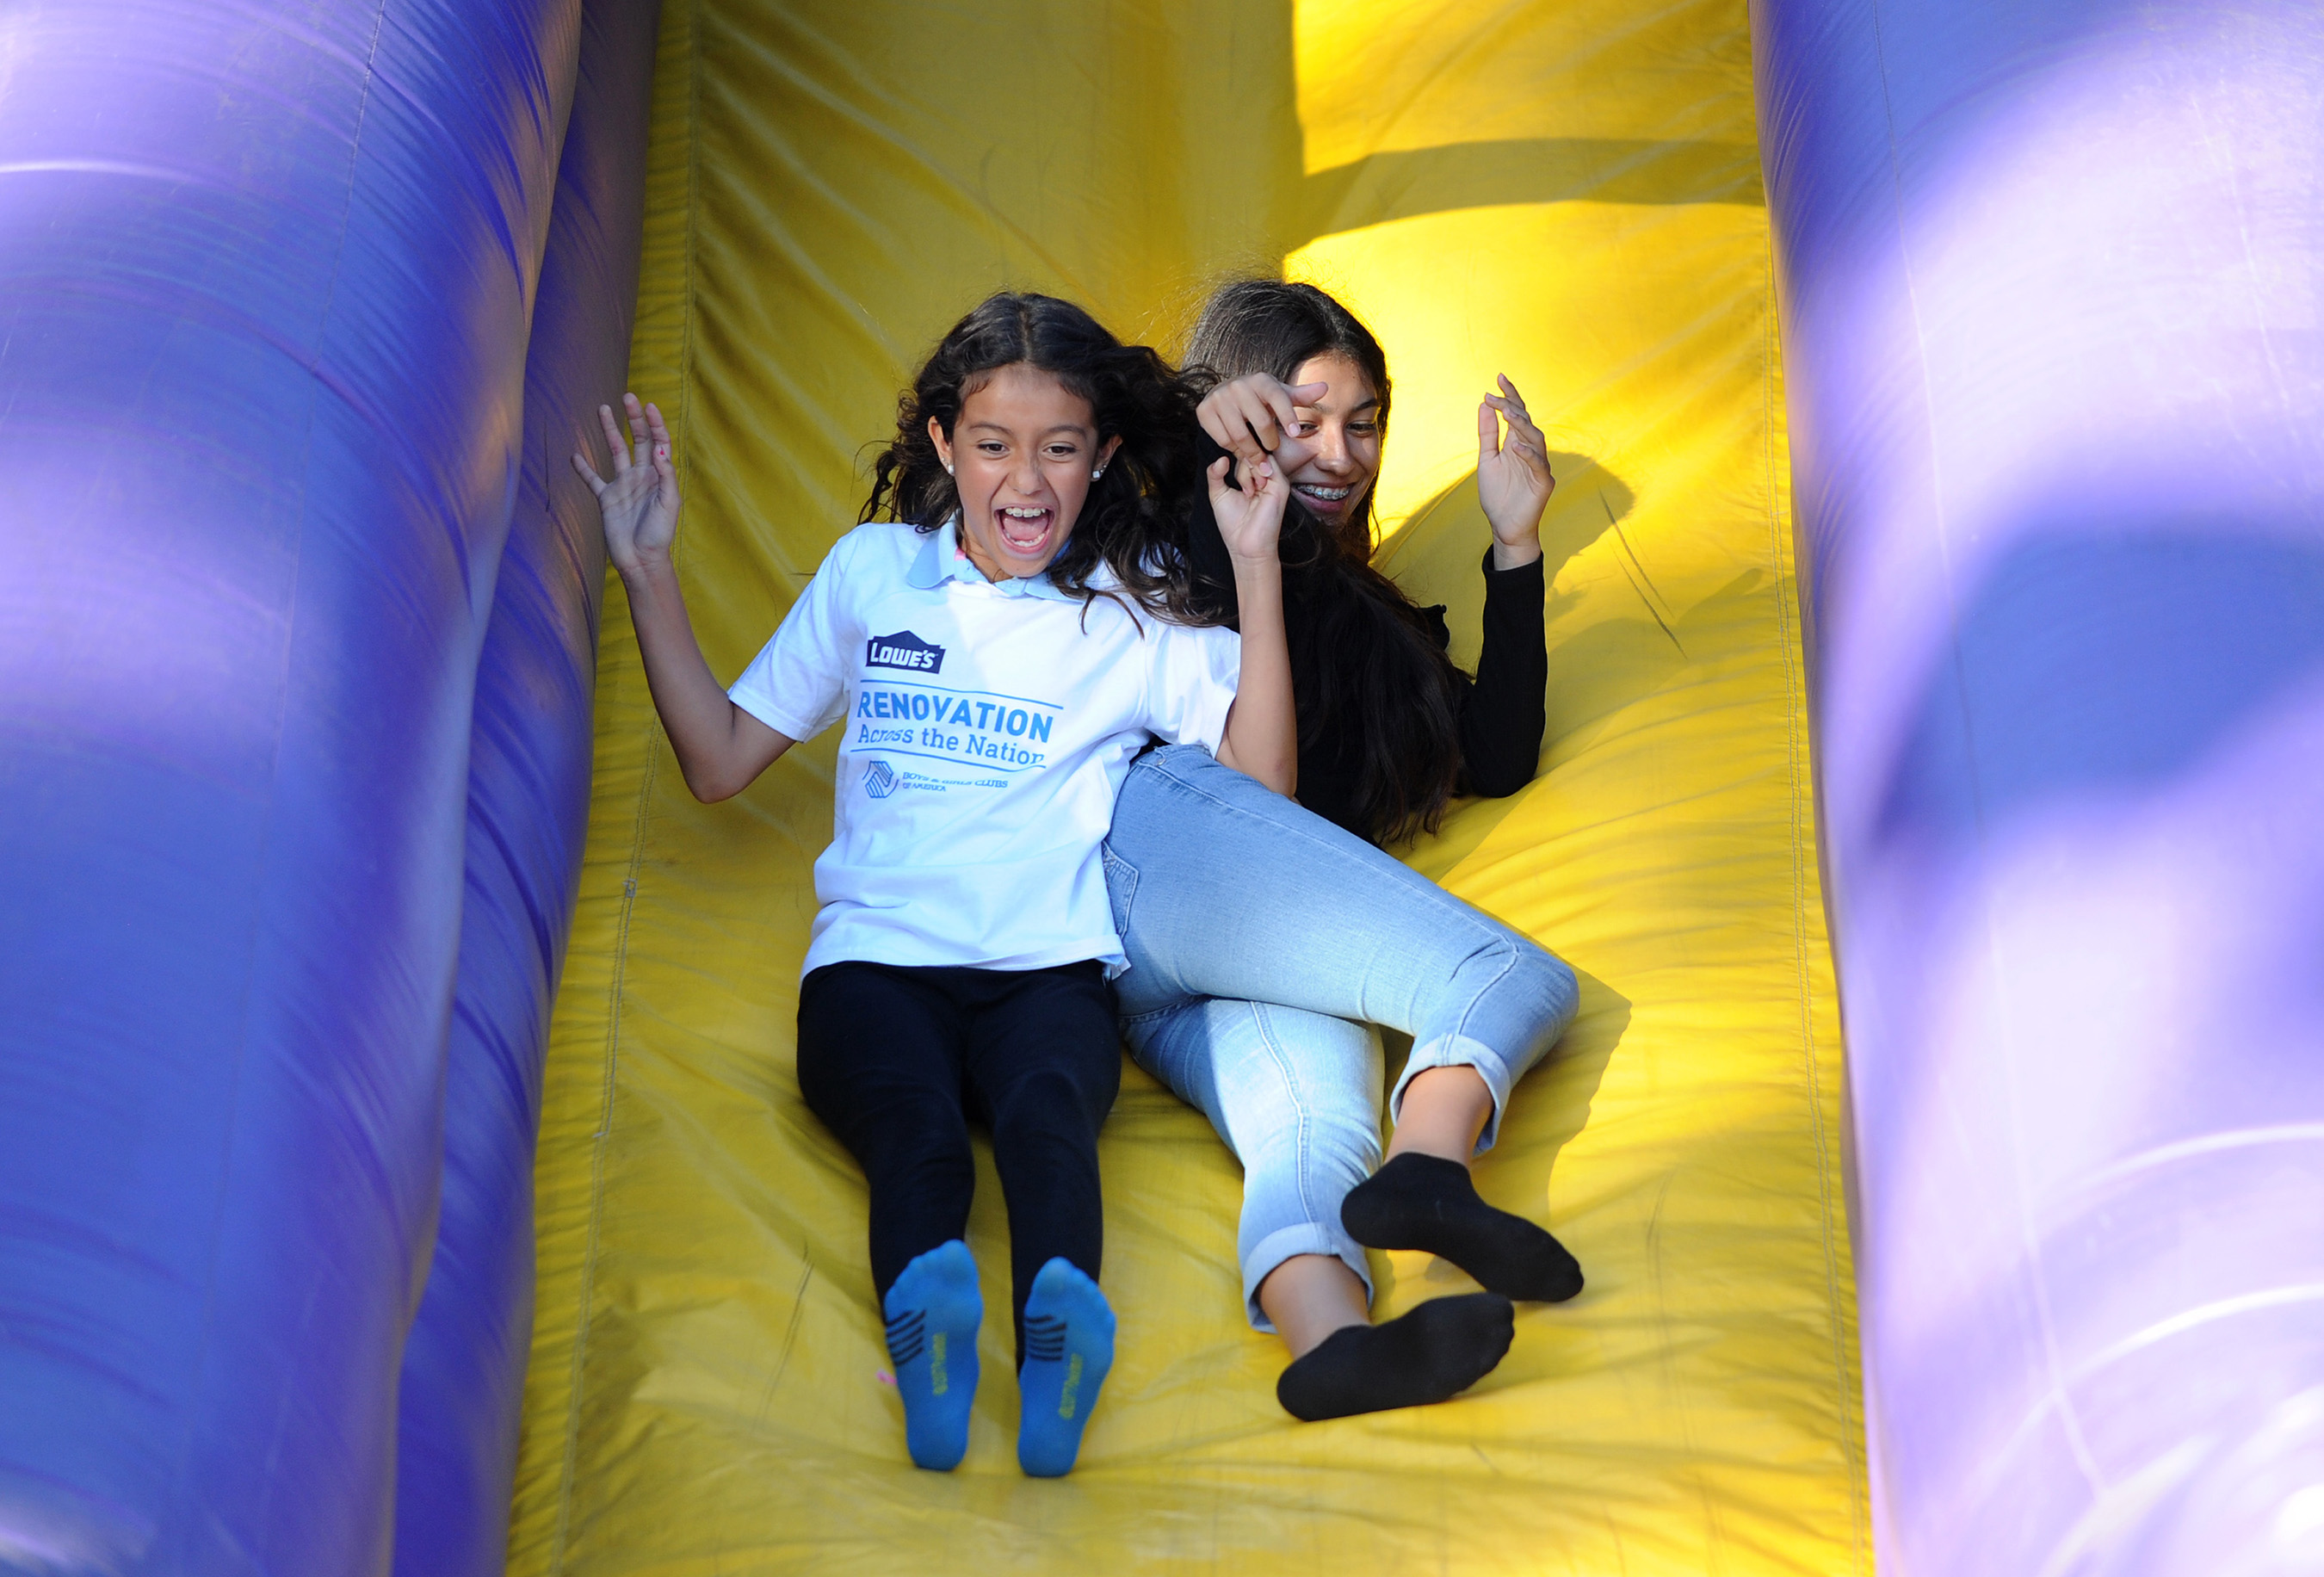 Boys & Girls Club of Long Beach members enjoy an inflatable slide during an event announcing the expansion of Renovation Across the Nation, the coast-to-coast renovation initiative powered by Lowe's employee volunteers and a $3.8 million donation.